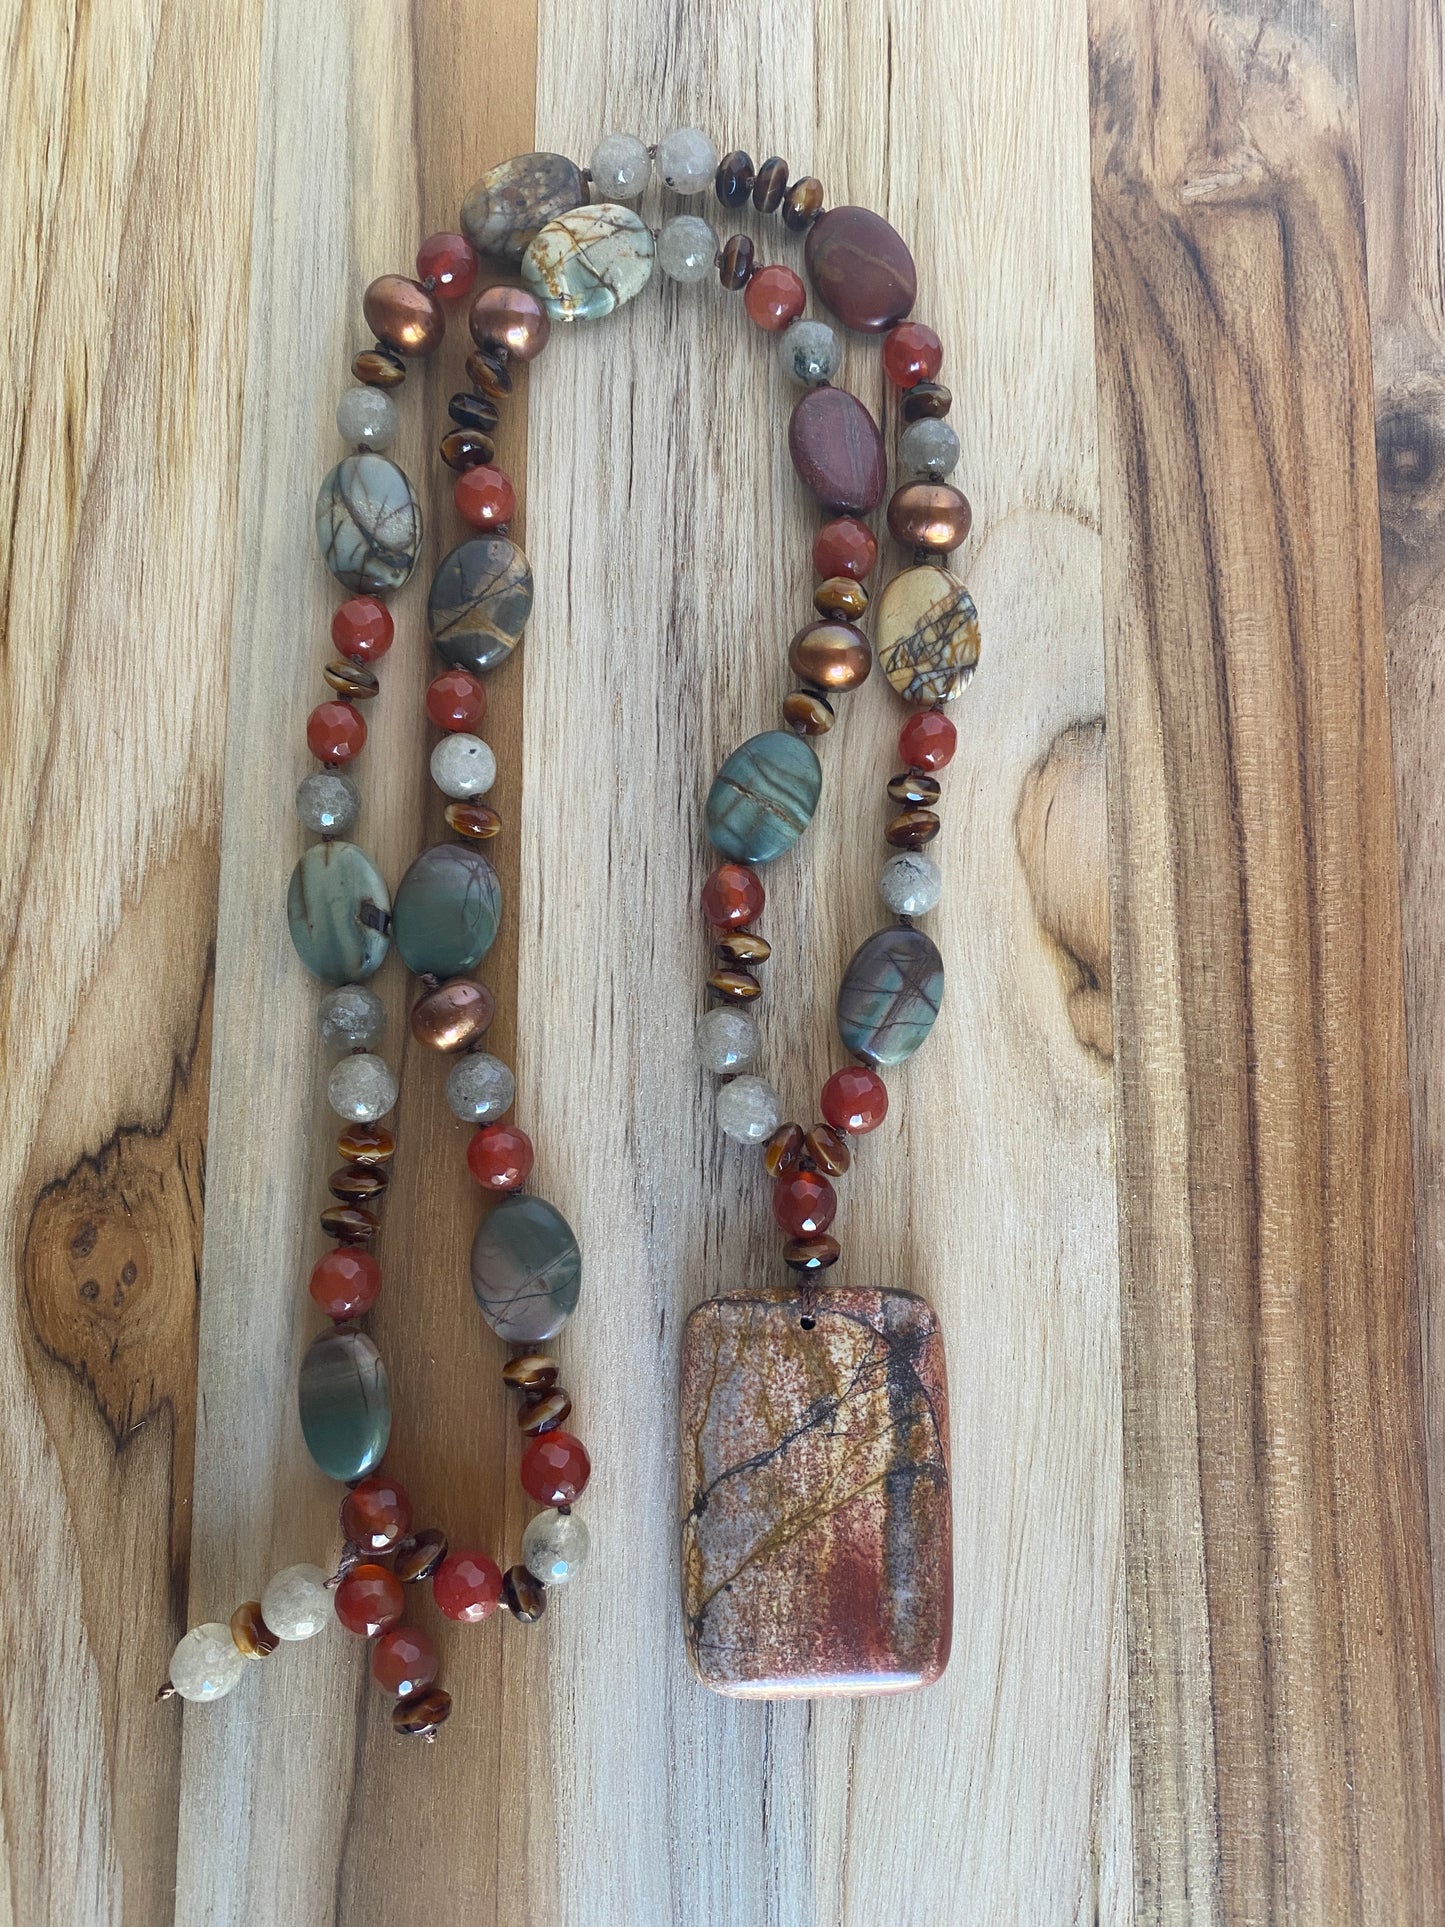 28" Long Picasso Jasper Oblong Pendant Necklace with Carnelian & Pearl Beads